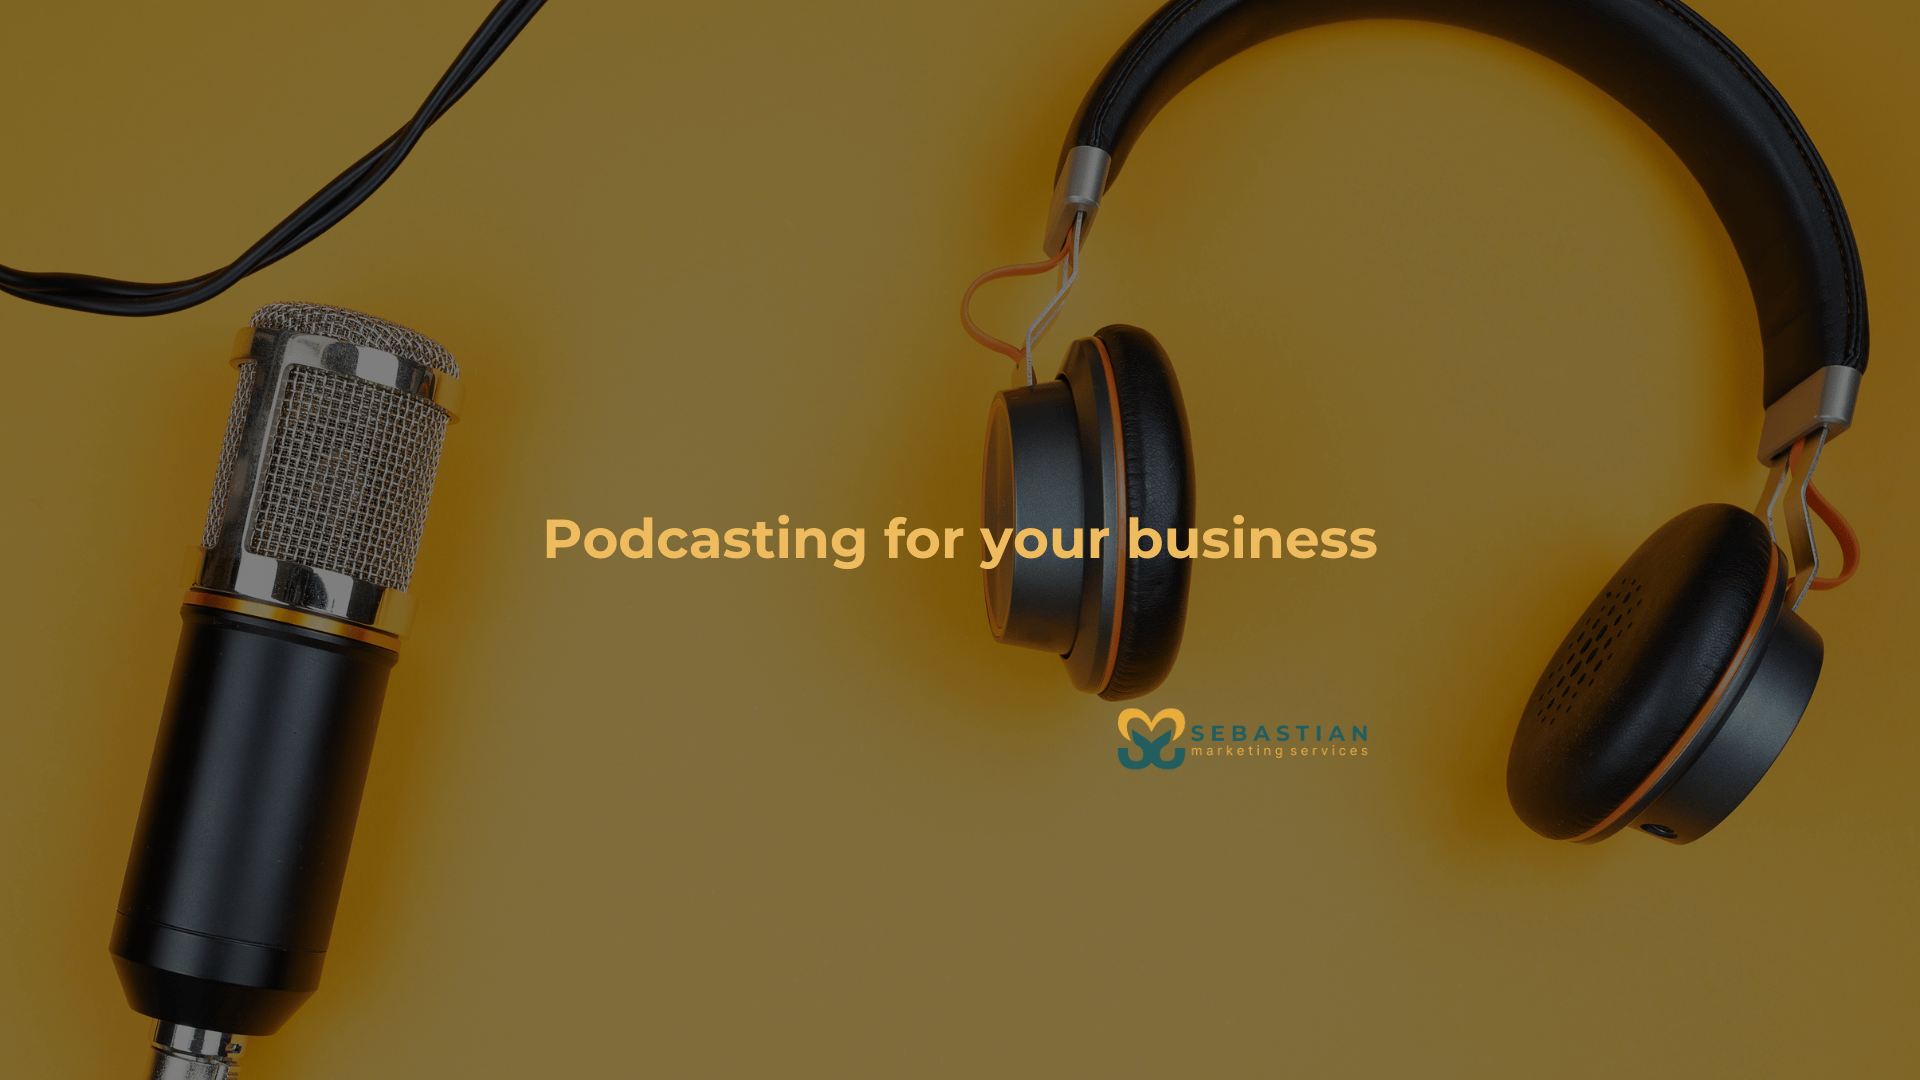 Podcasting for your business